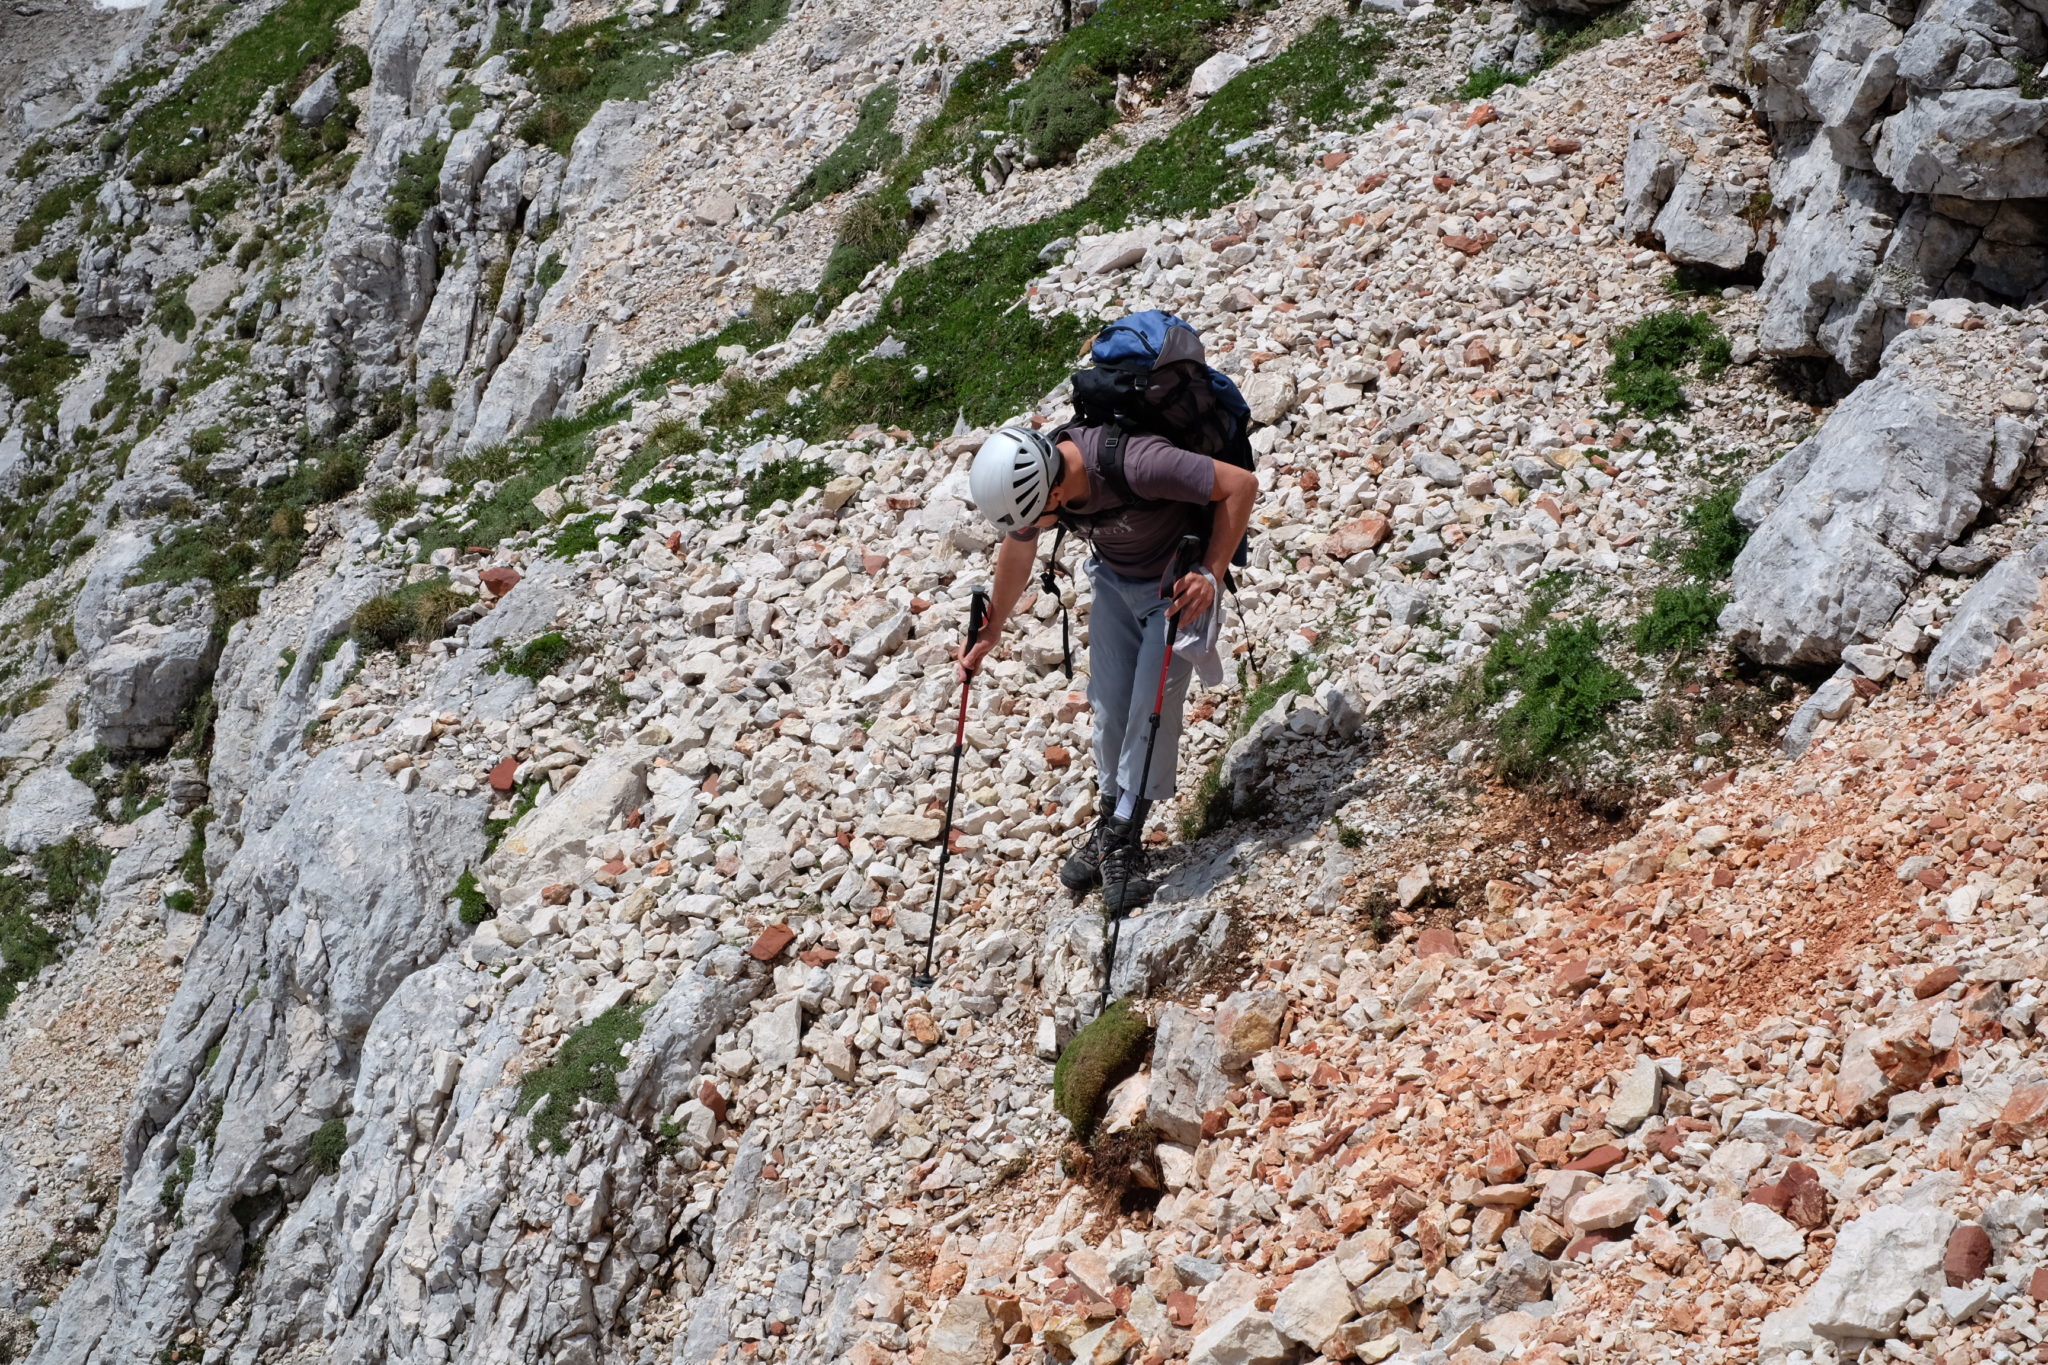 Finding a safe way down to the marked trail from Križ to Stenar.